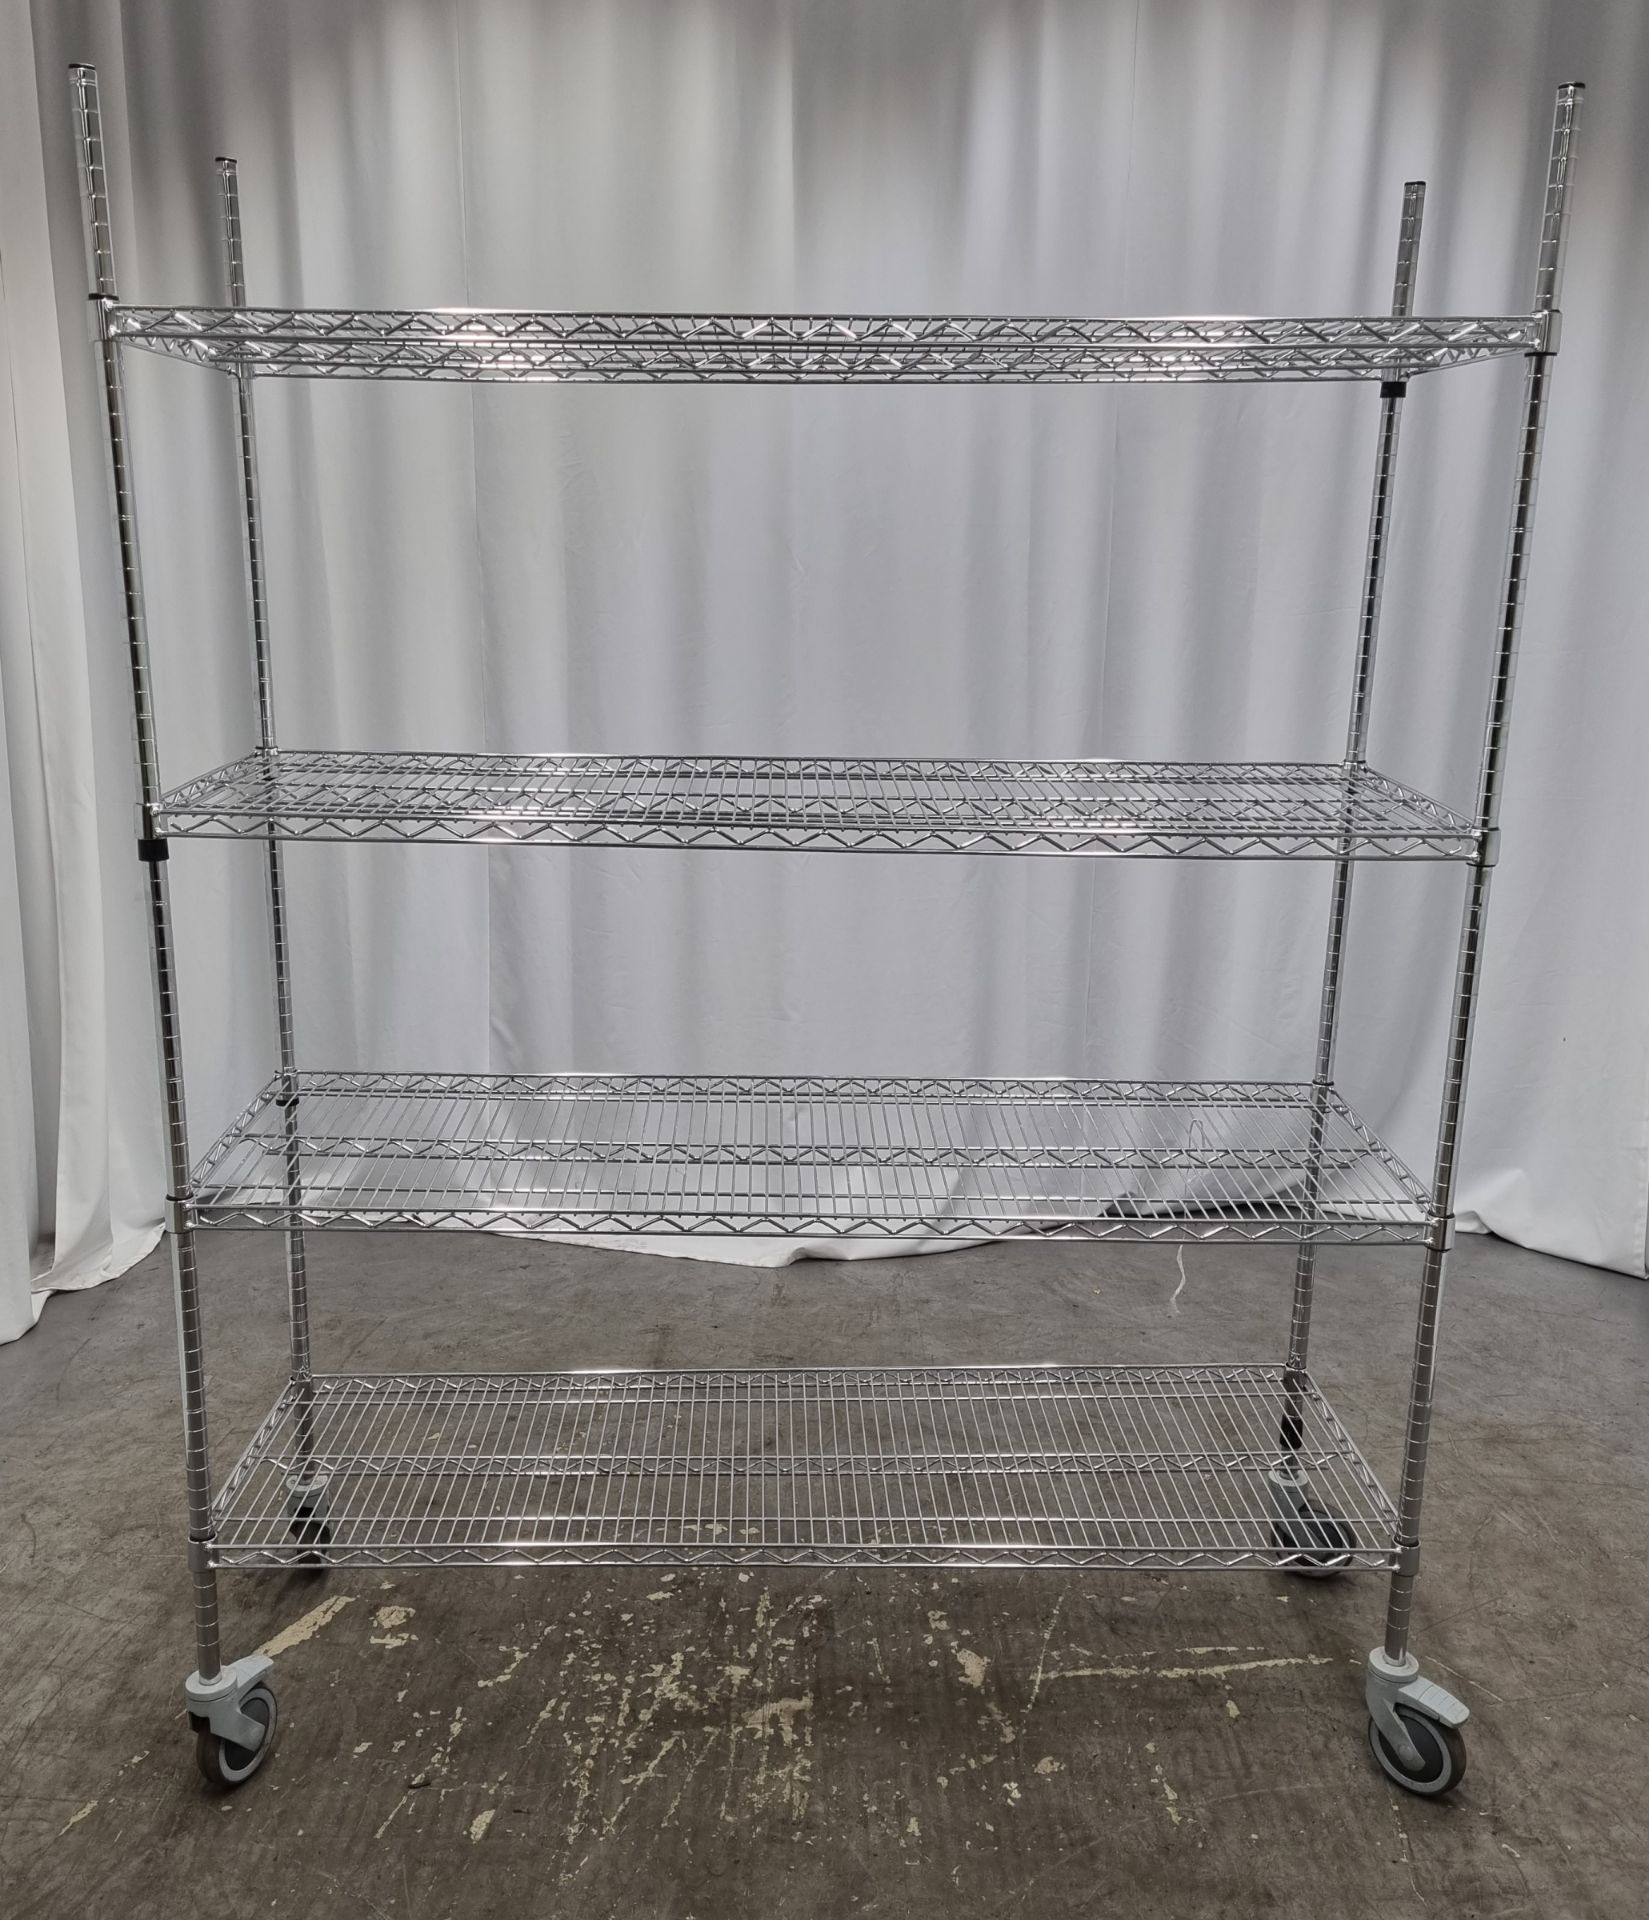 Stainless steel catering racking 4 x shelf on wheels - Image 3 of 5